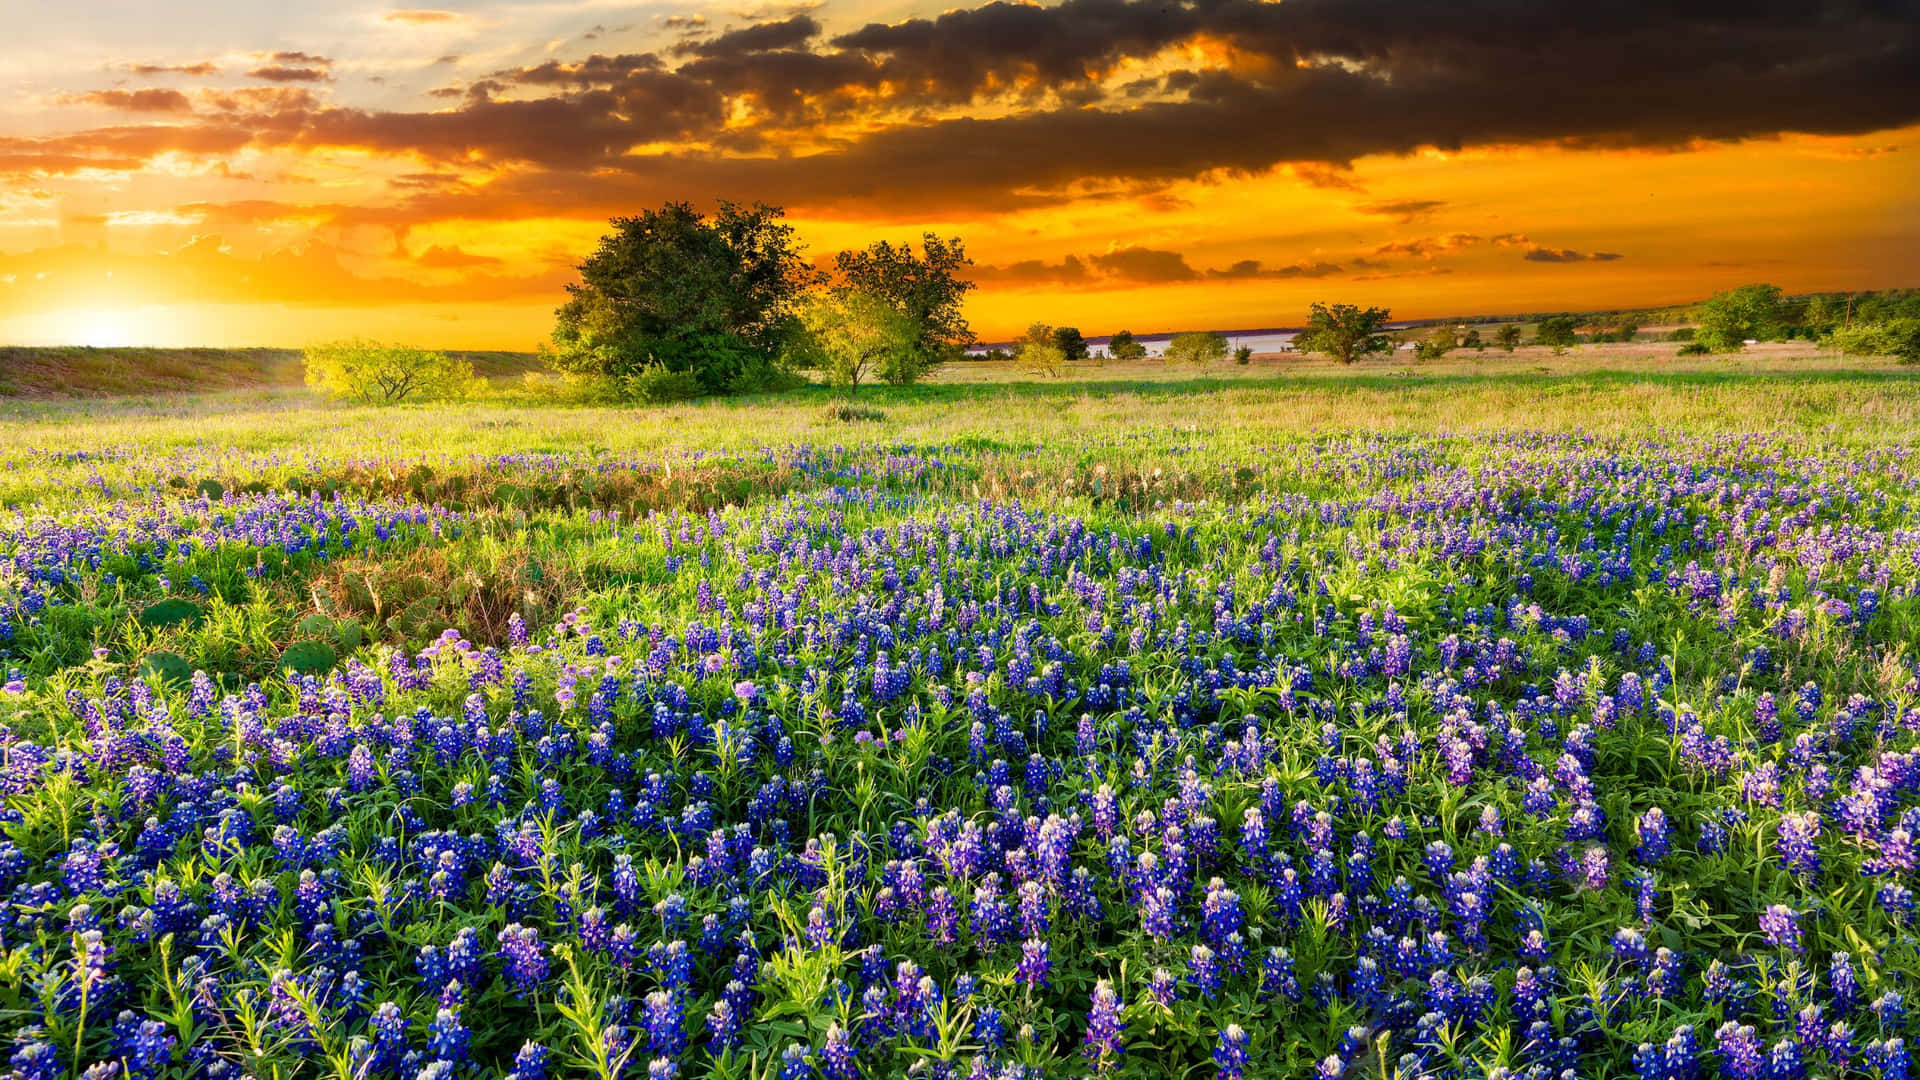 A stunning view of the Texas sunset